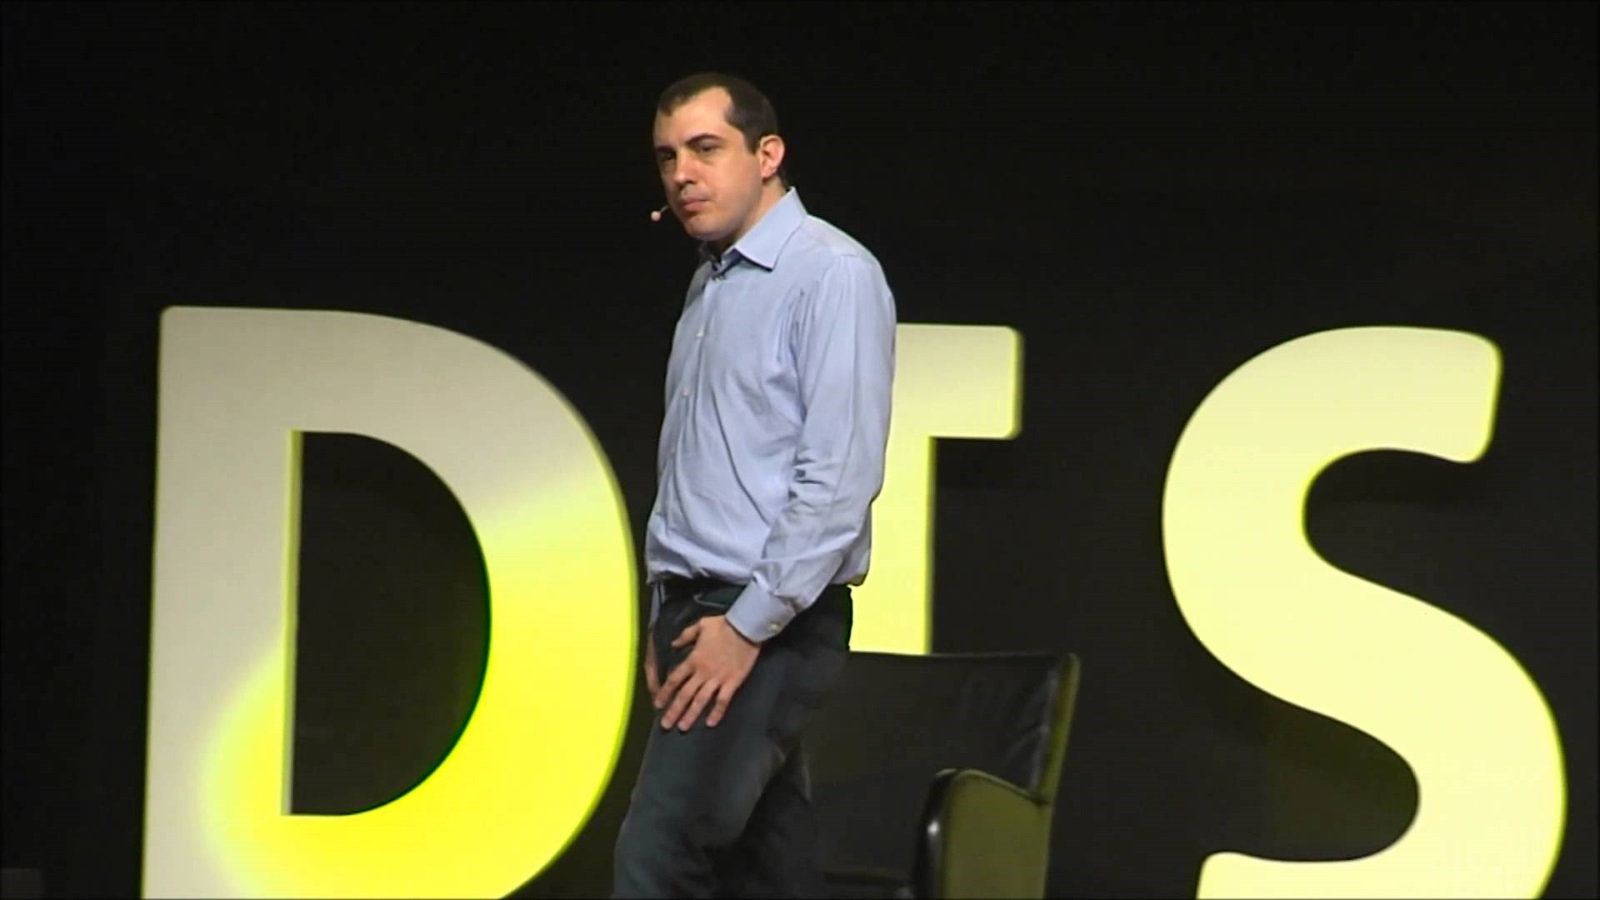 Andreas M. Antonopoulos, author of “Mastering Bitcoin”